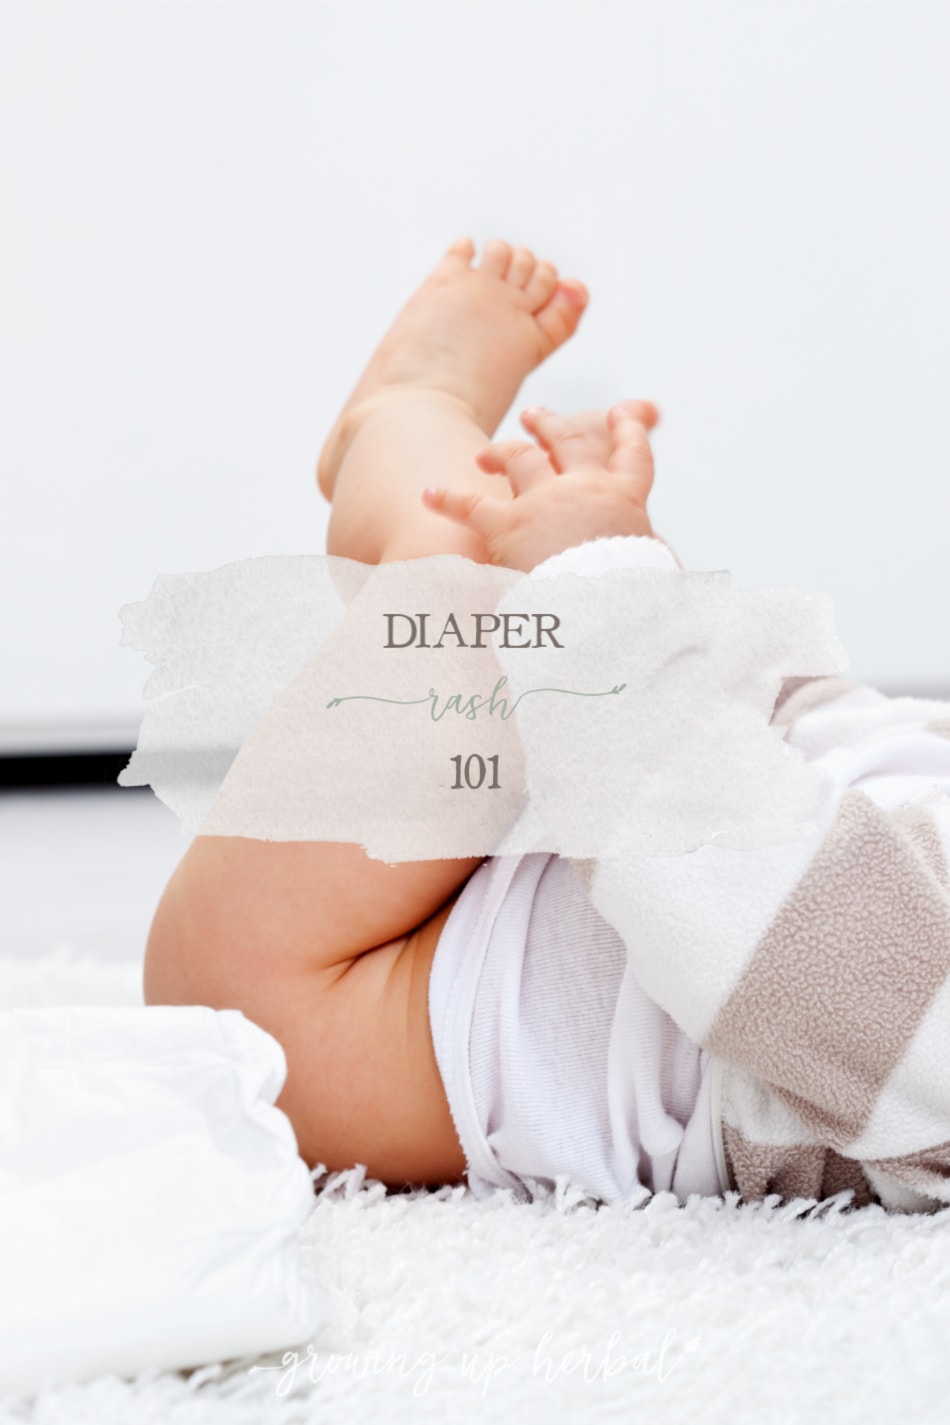 Diaper Rash 101 | GrowingUpHerbal.com | Learn what it is, what causes it, and how to prevent and treat it naturally!